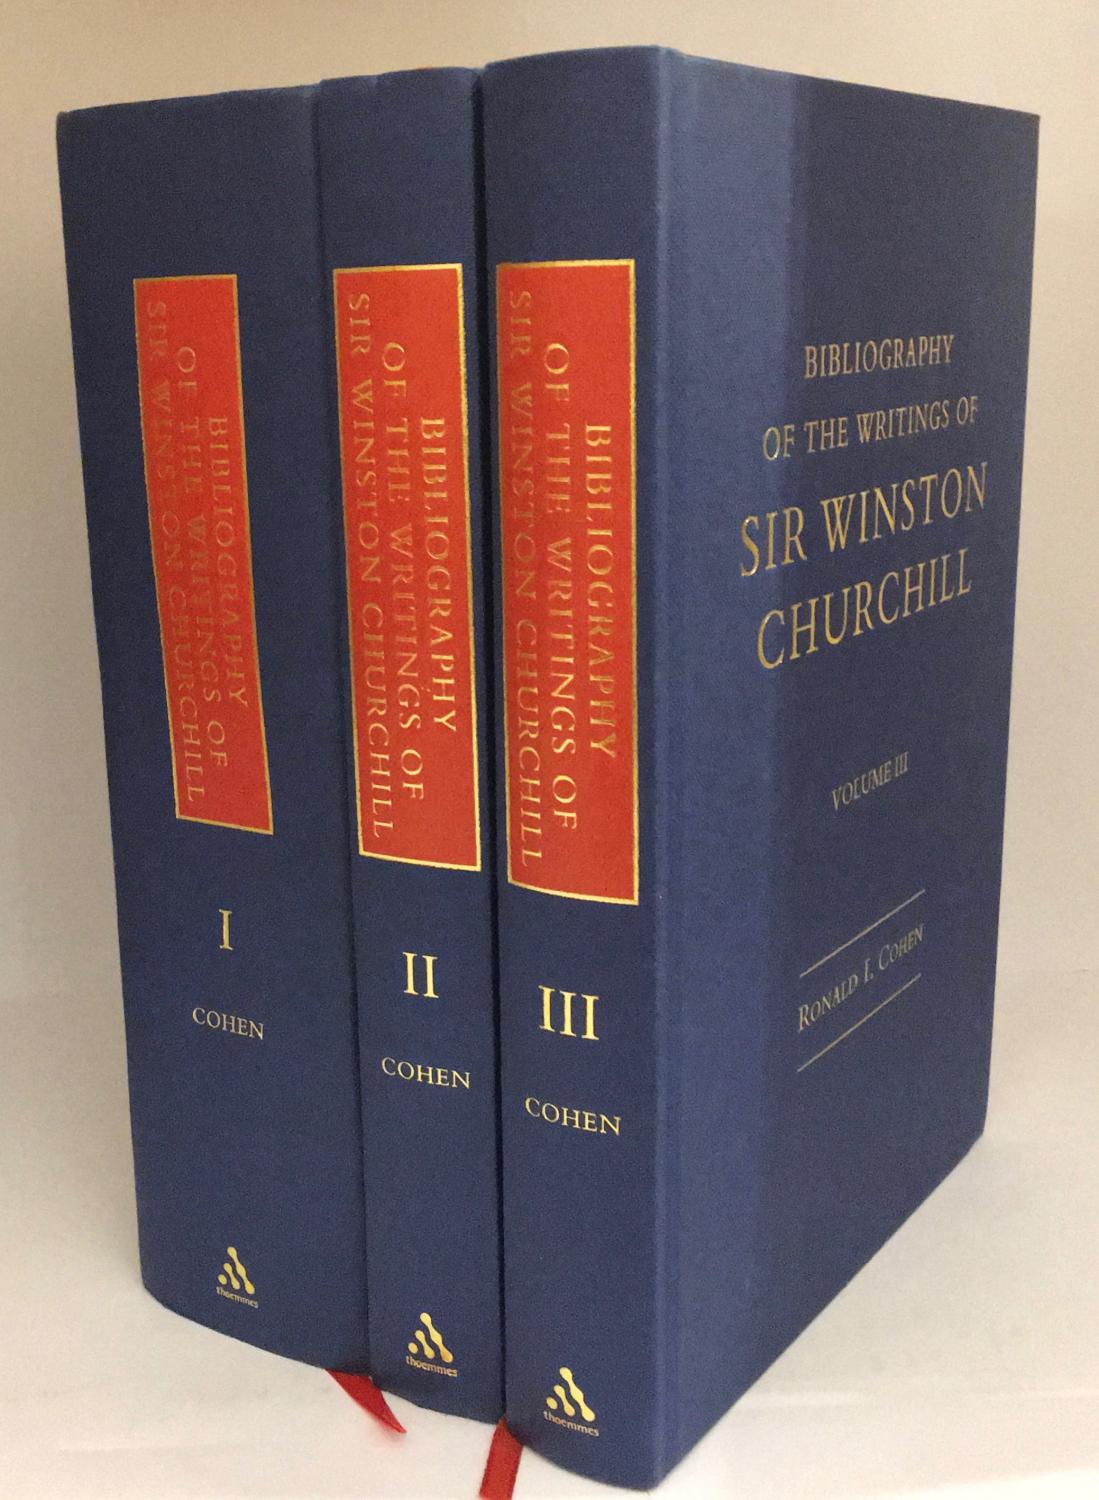 Bibliography of the Writings of Sir Winston Churchill [COMPLETE in 3 volumes] - COHEN, Ronald I